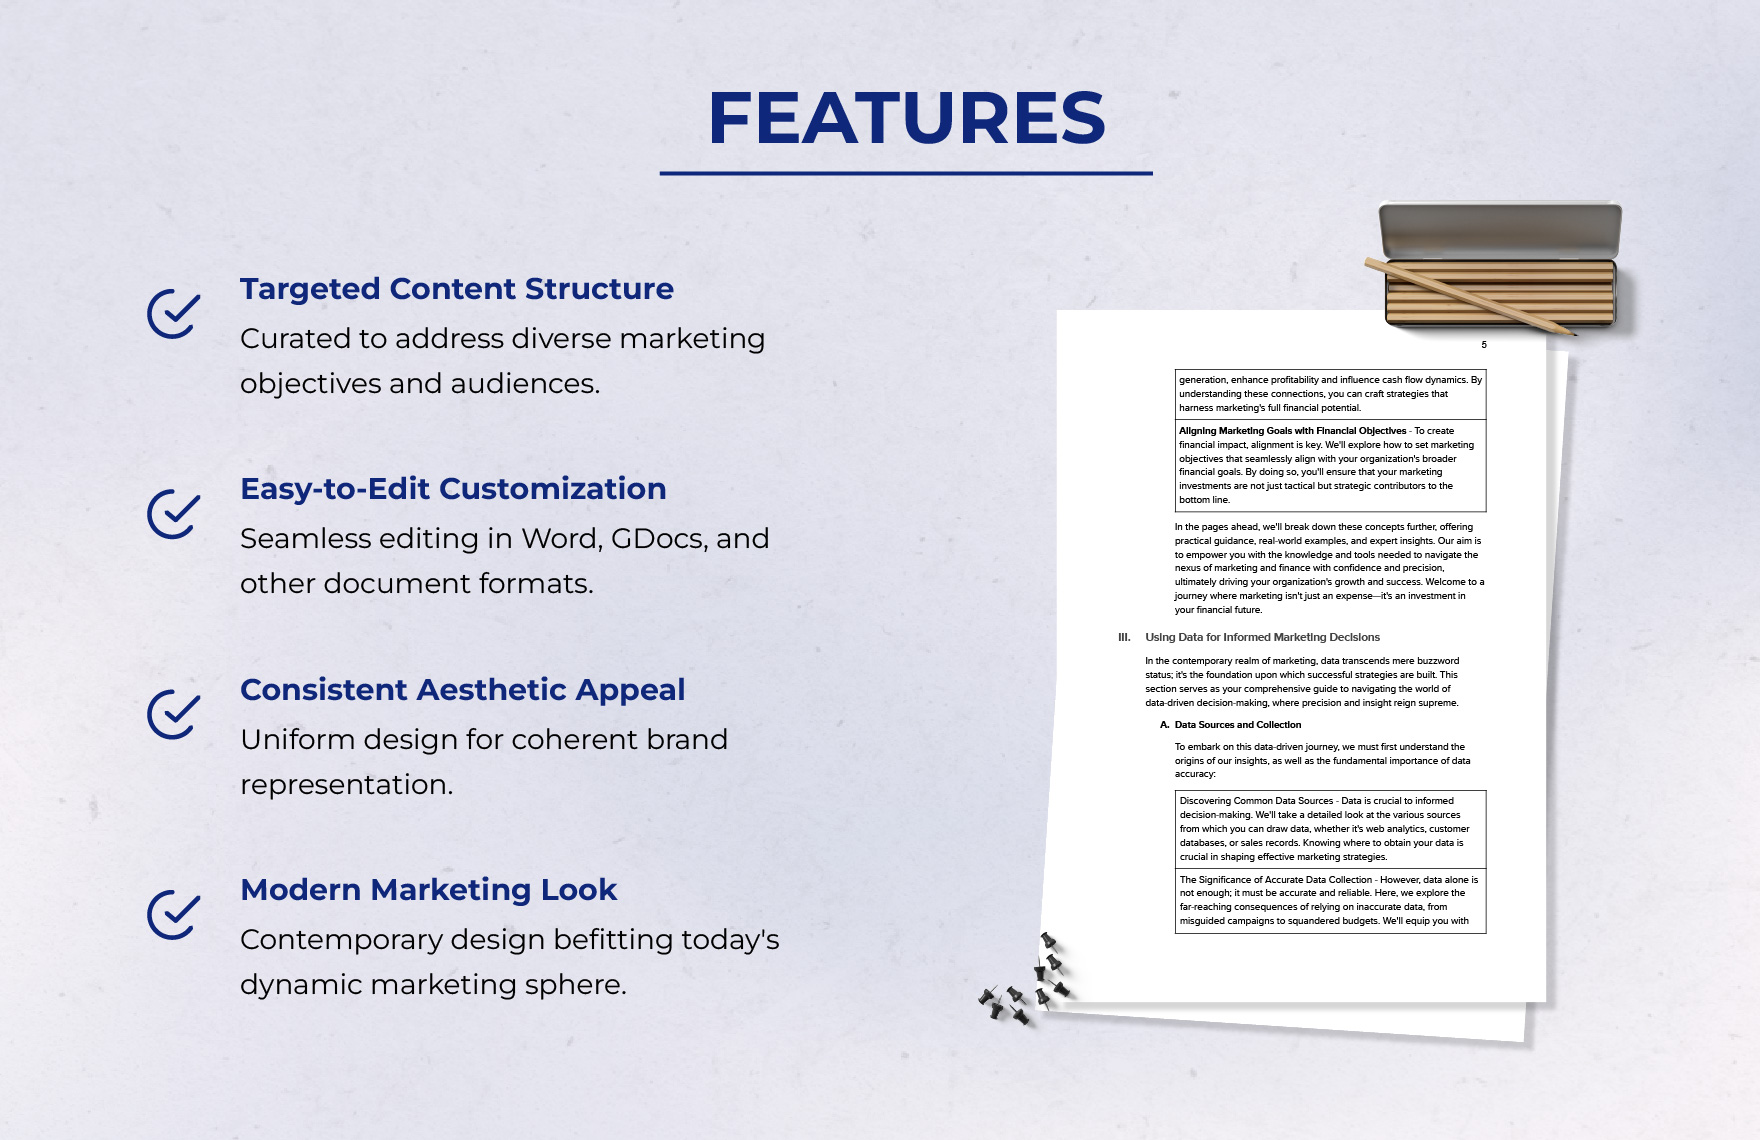 Marketing Financial Impact User Guide for Decisions Template